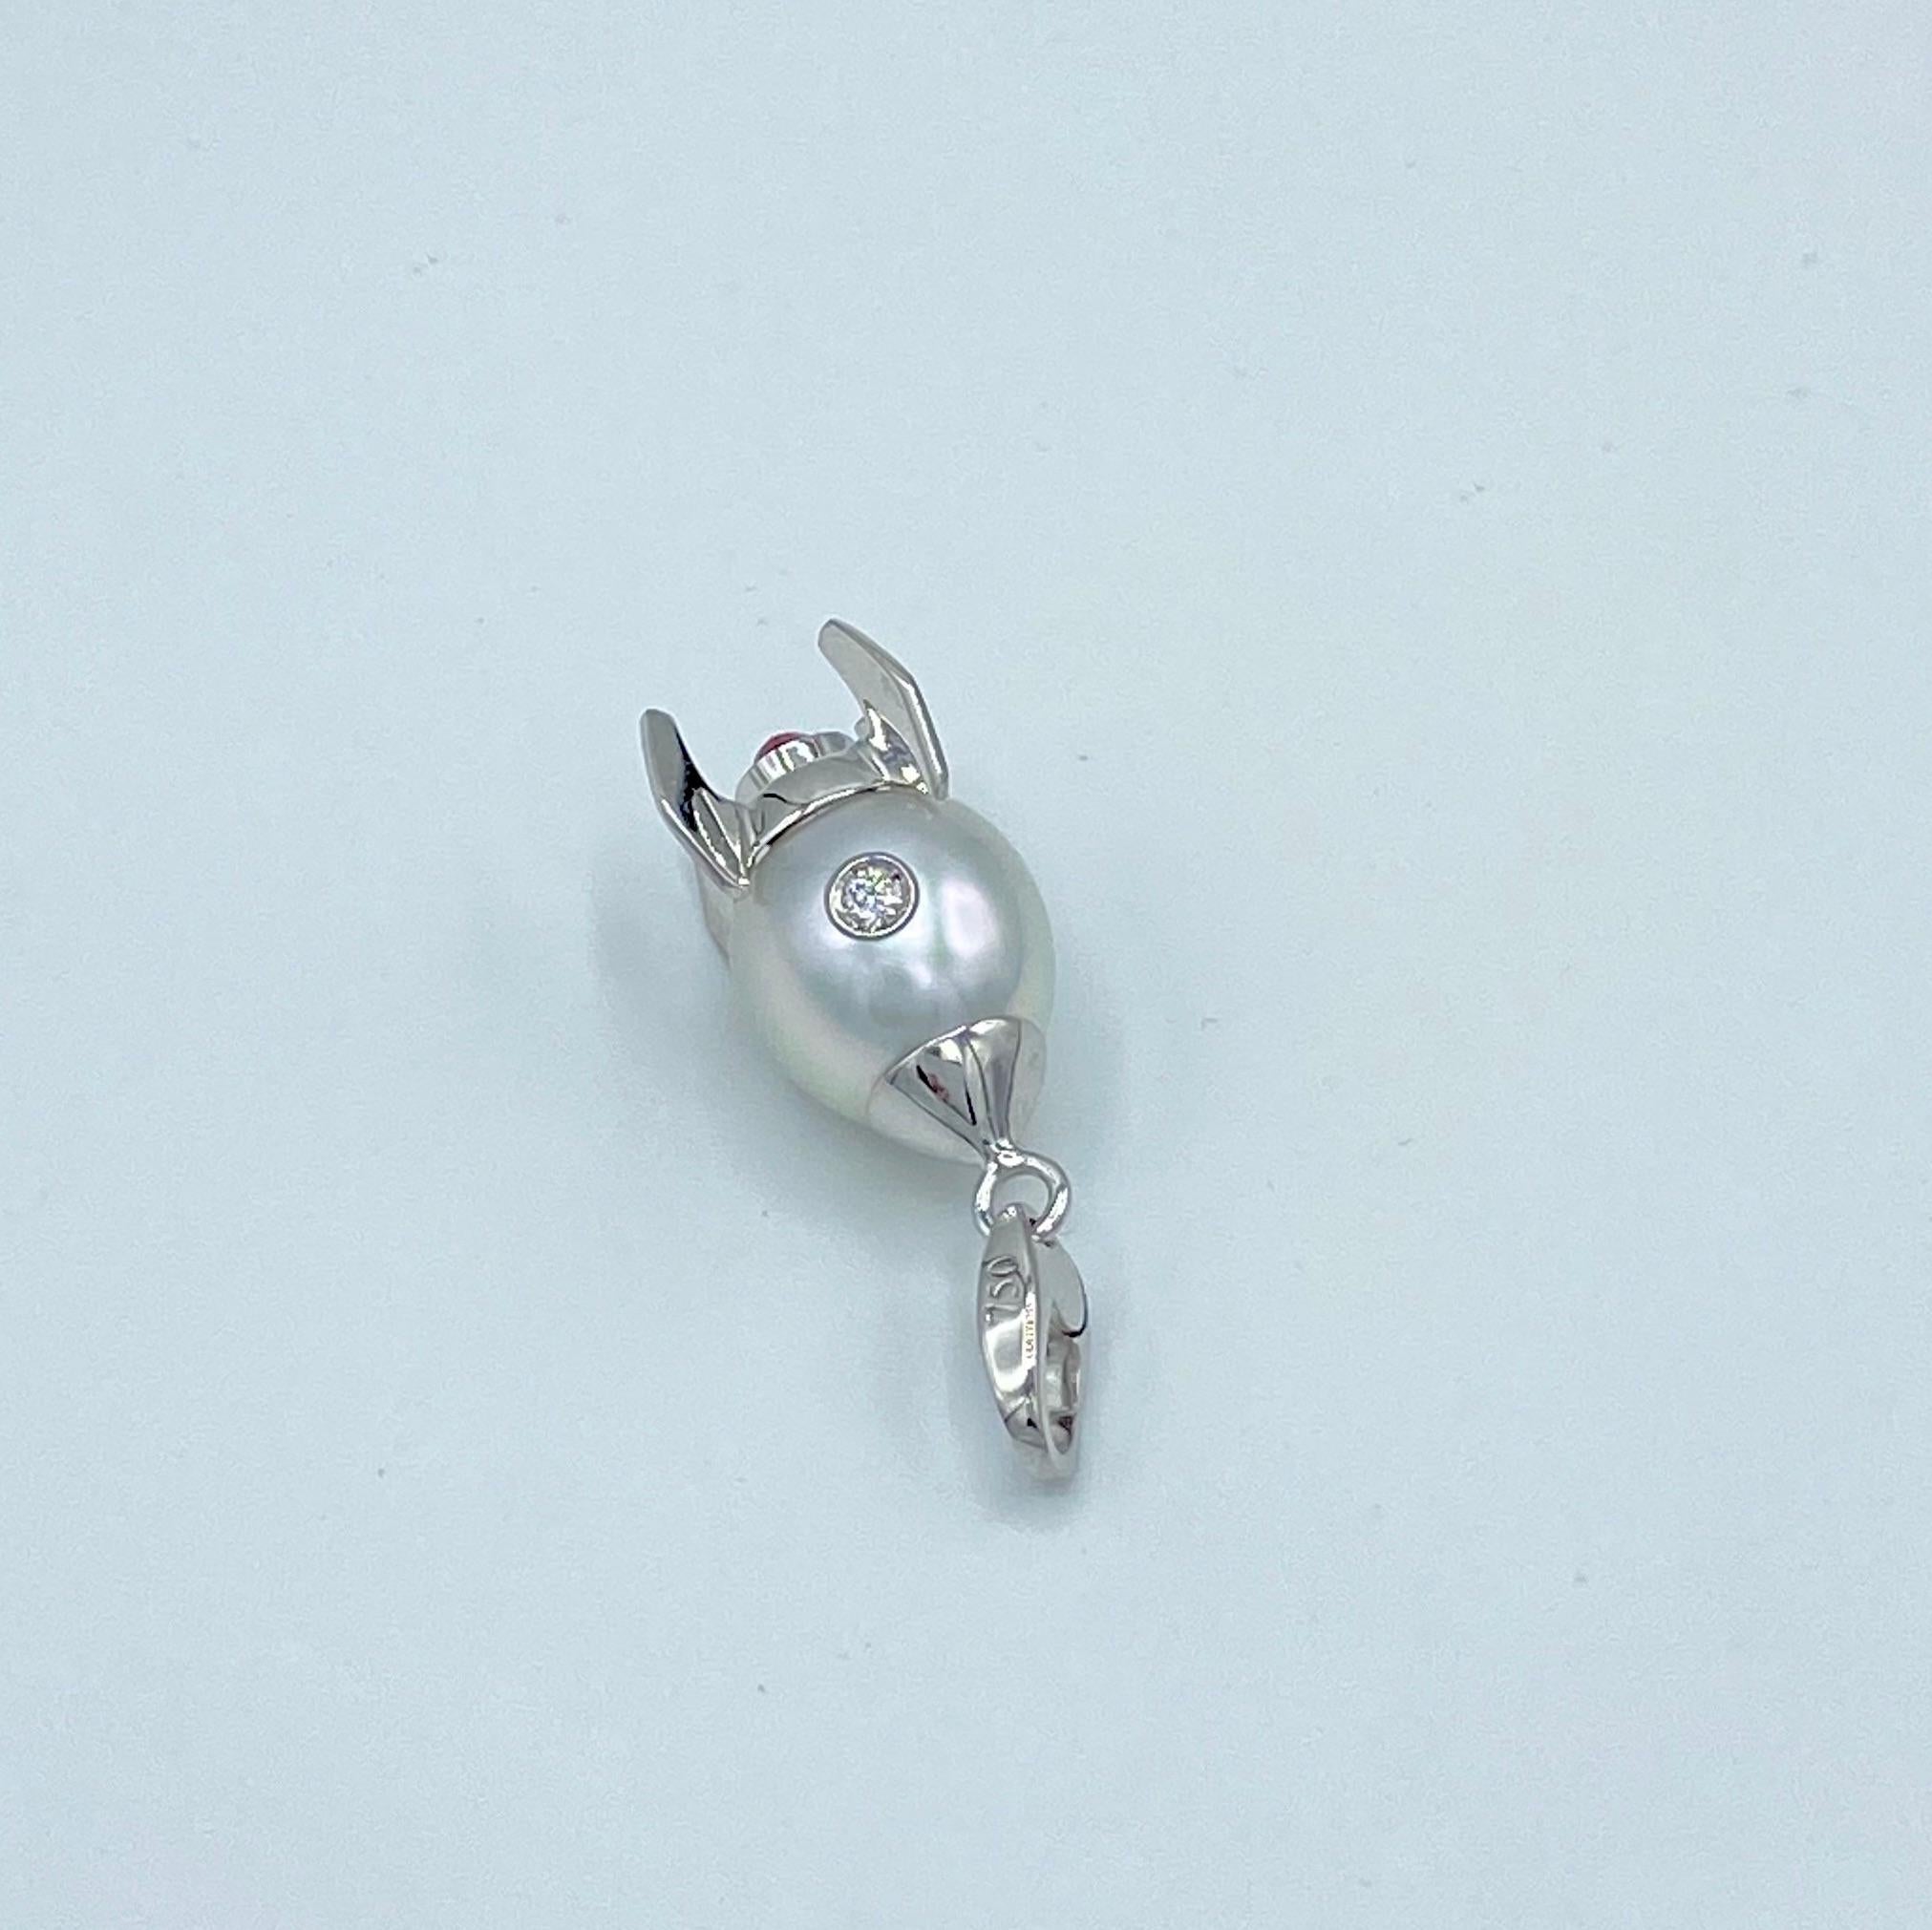 Missile Diamond Sapphire 18Kt Gold Australian Pearl Charm or Pendant/Necklace Handmade in Italy
The particular shape of this pearl allowed me to make a nice rocket charm.
I made it pointed by creating a conical cap at the top. I inserted a bezel